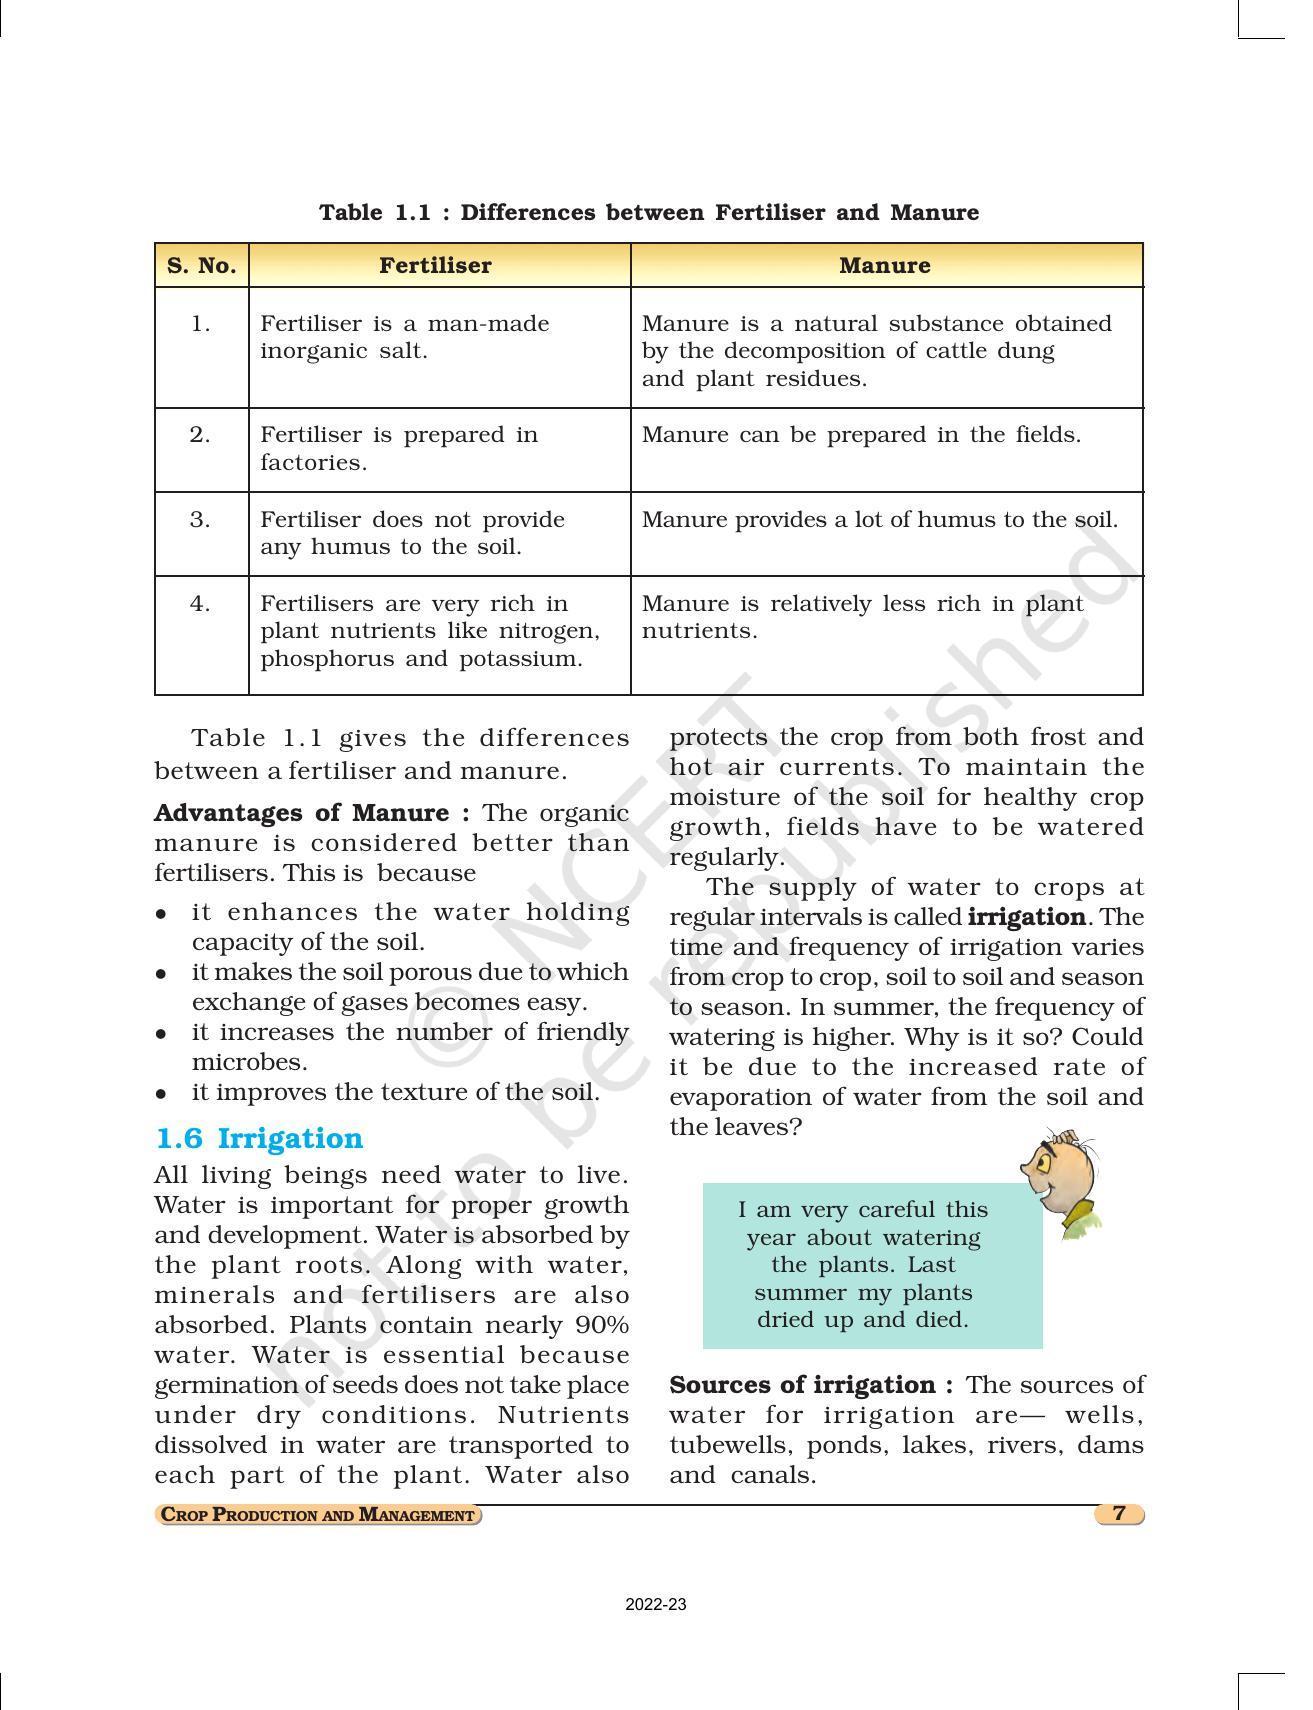 NCERT Book for Class 8 Science Chapter 1 Crop Production and Management - Page 7